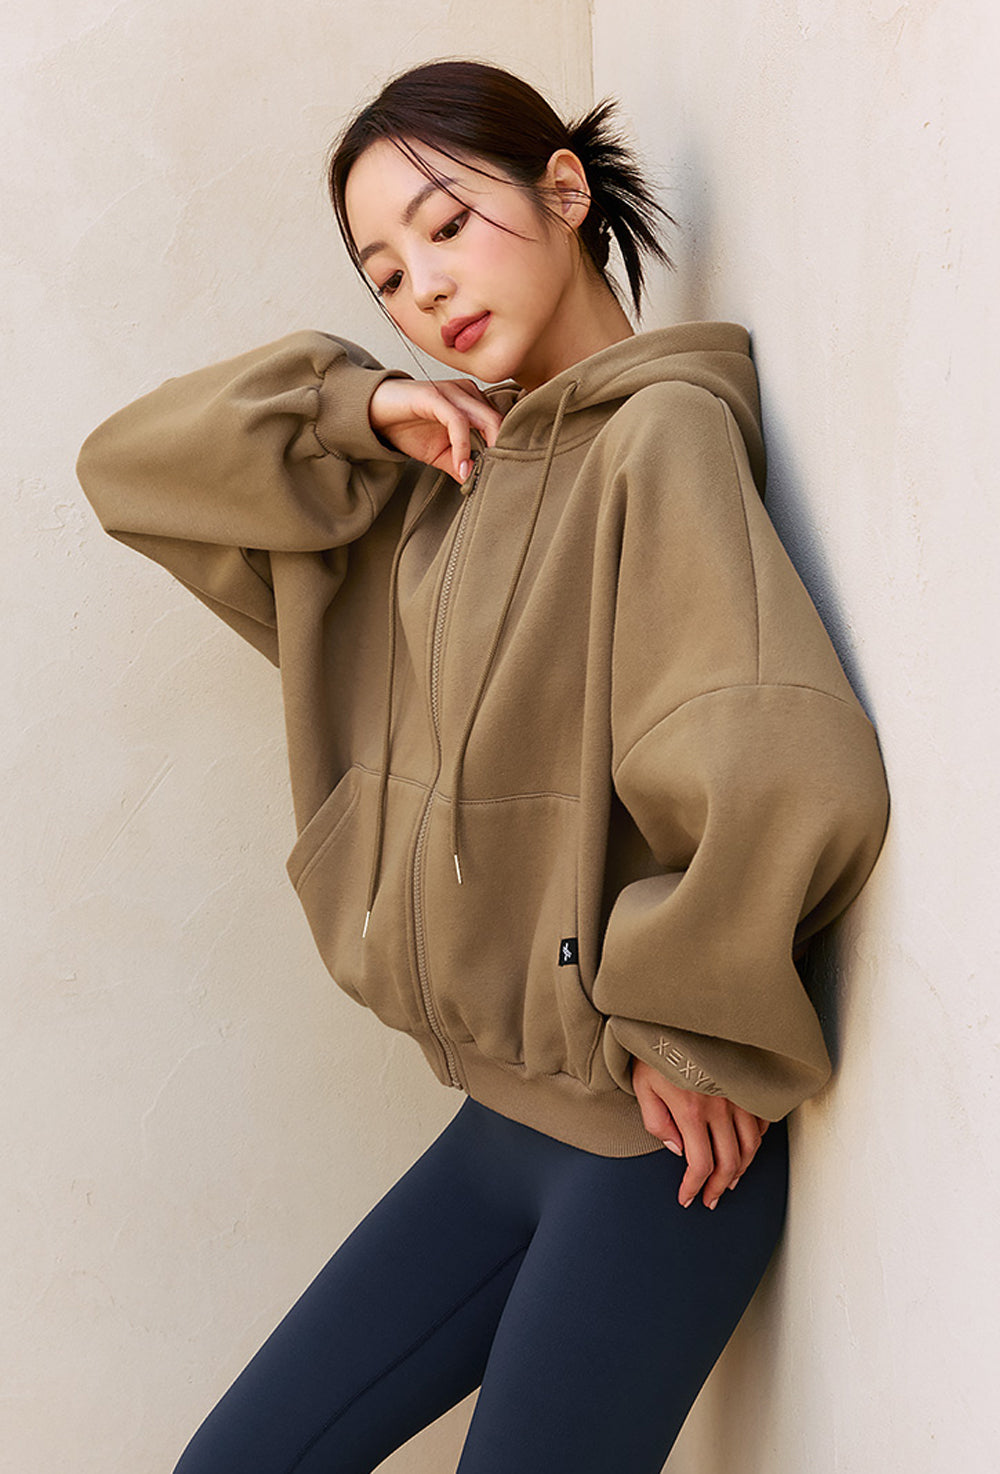 Napping Hood Zip-up - Cafe Au Lait